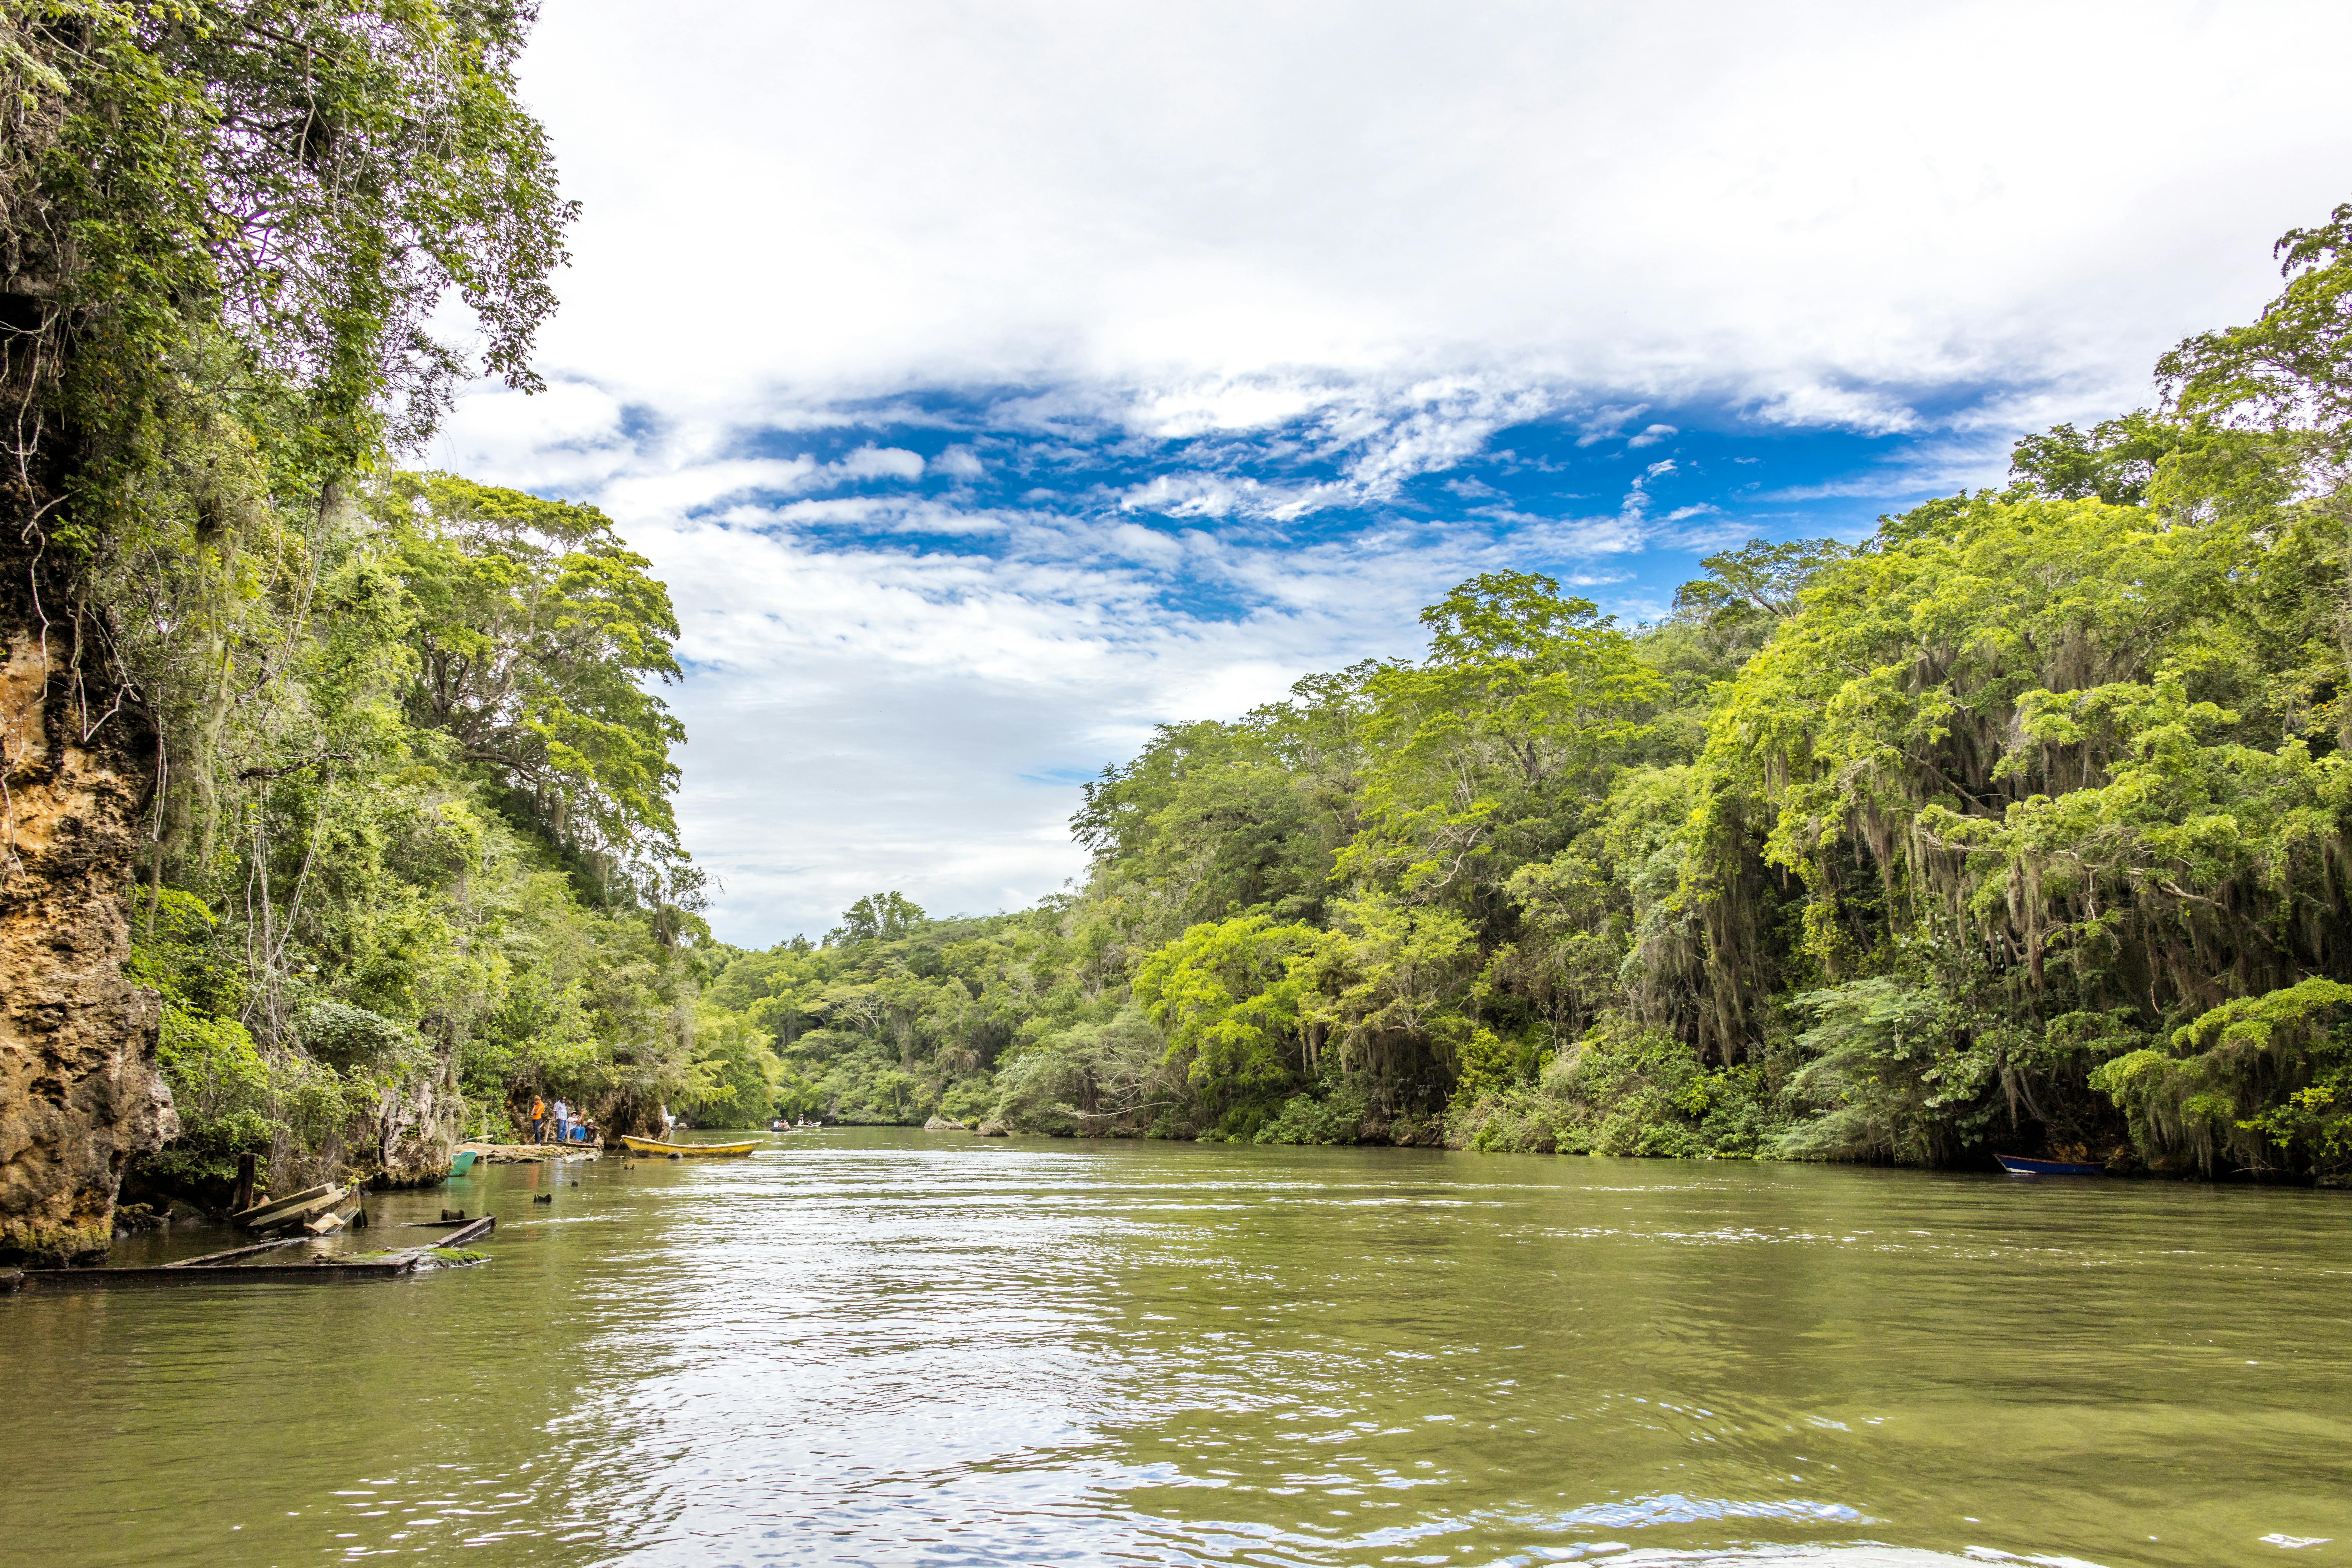 Higuey and River Yuma Tour